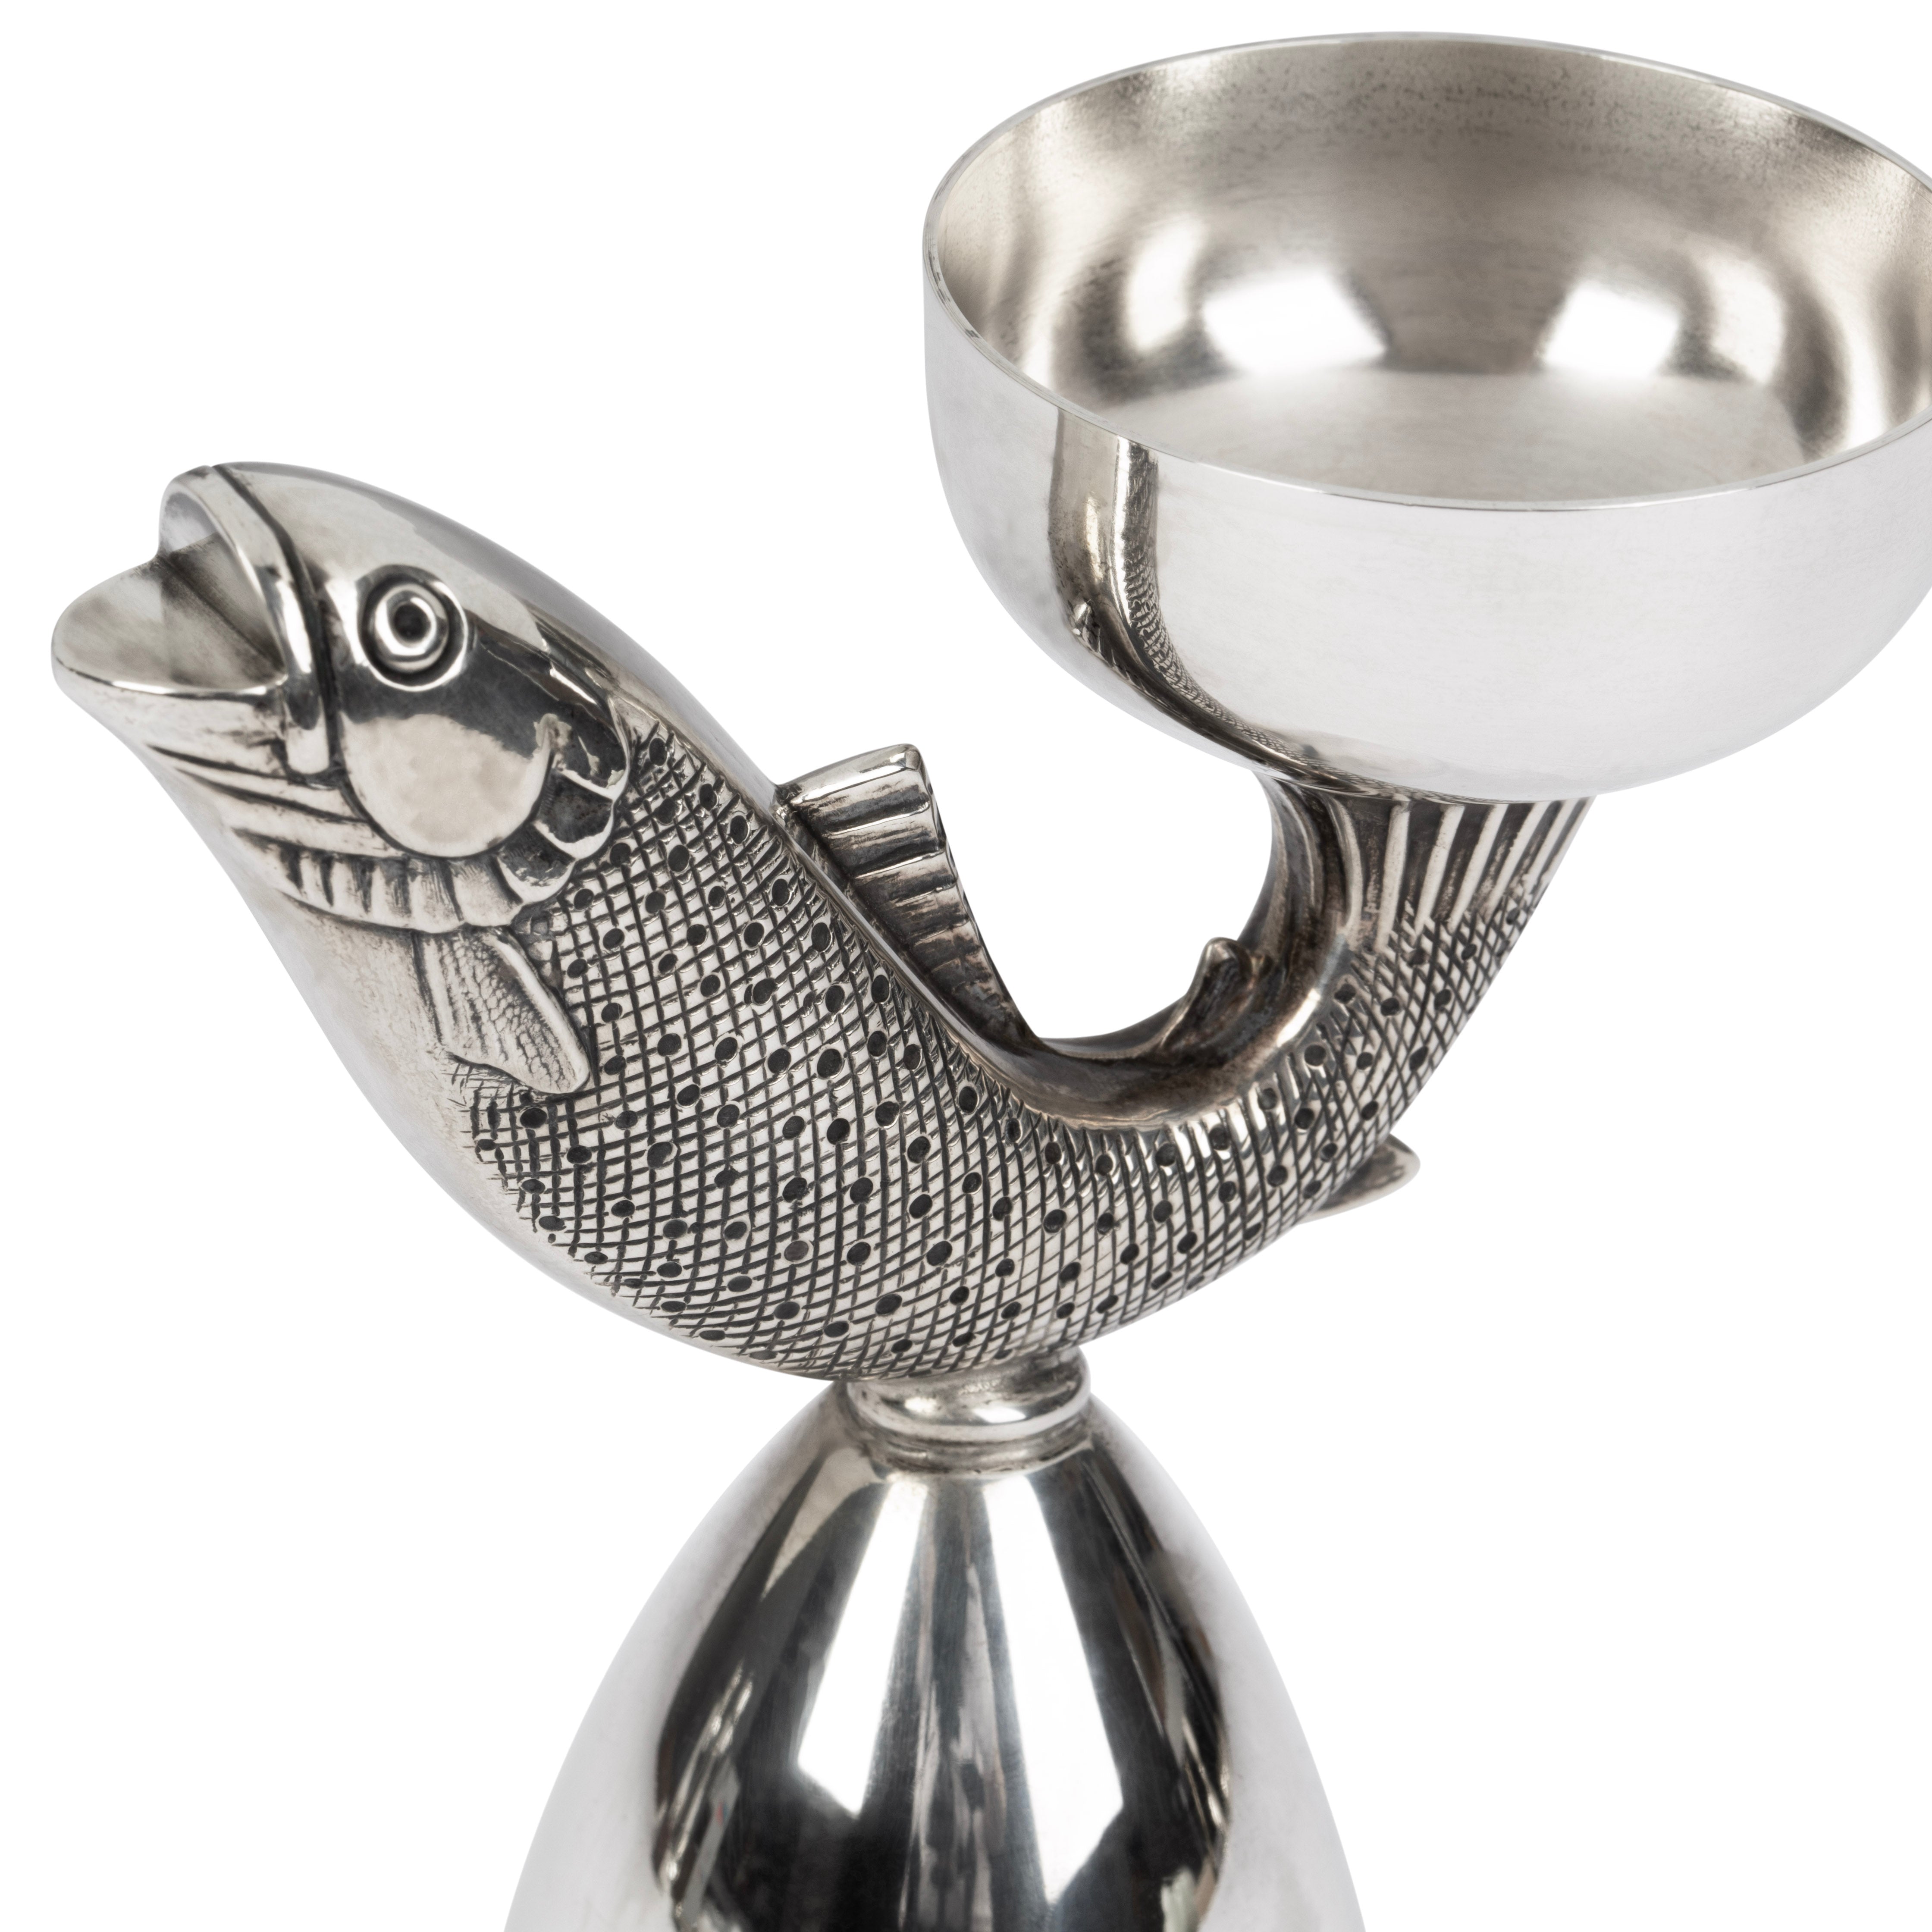 Sterling Silver Rainbow Trout Fish Double Spirits Measure Jigger